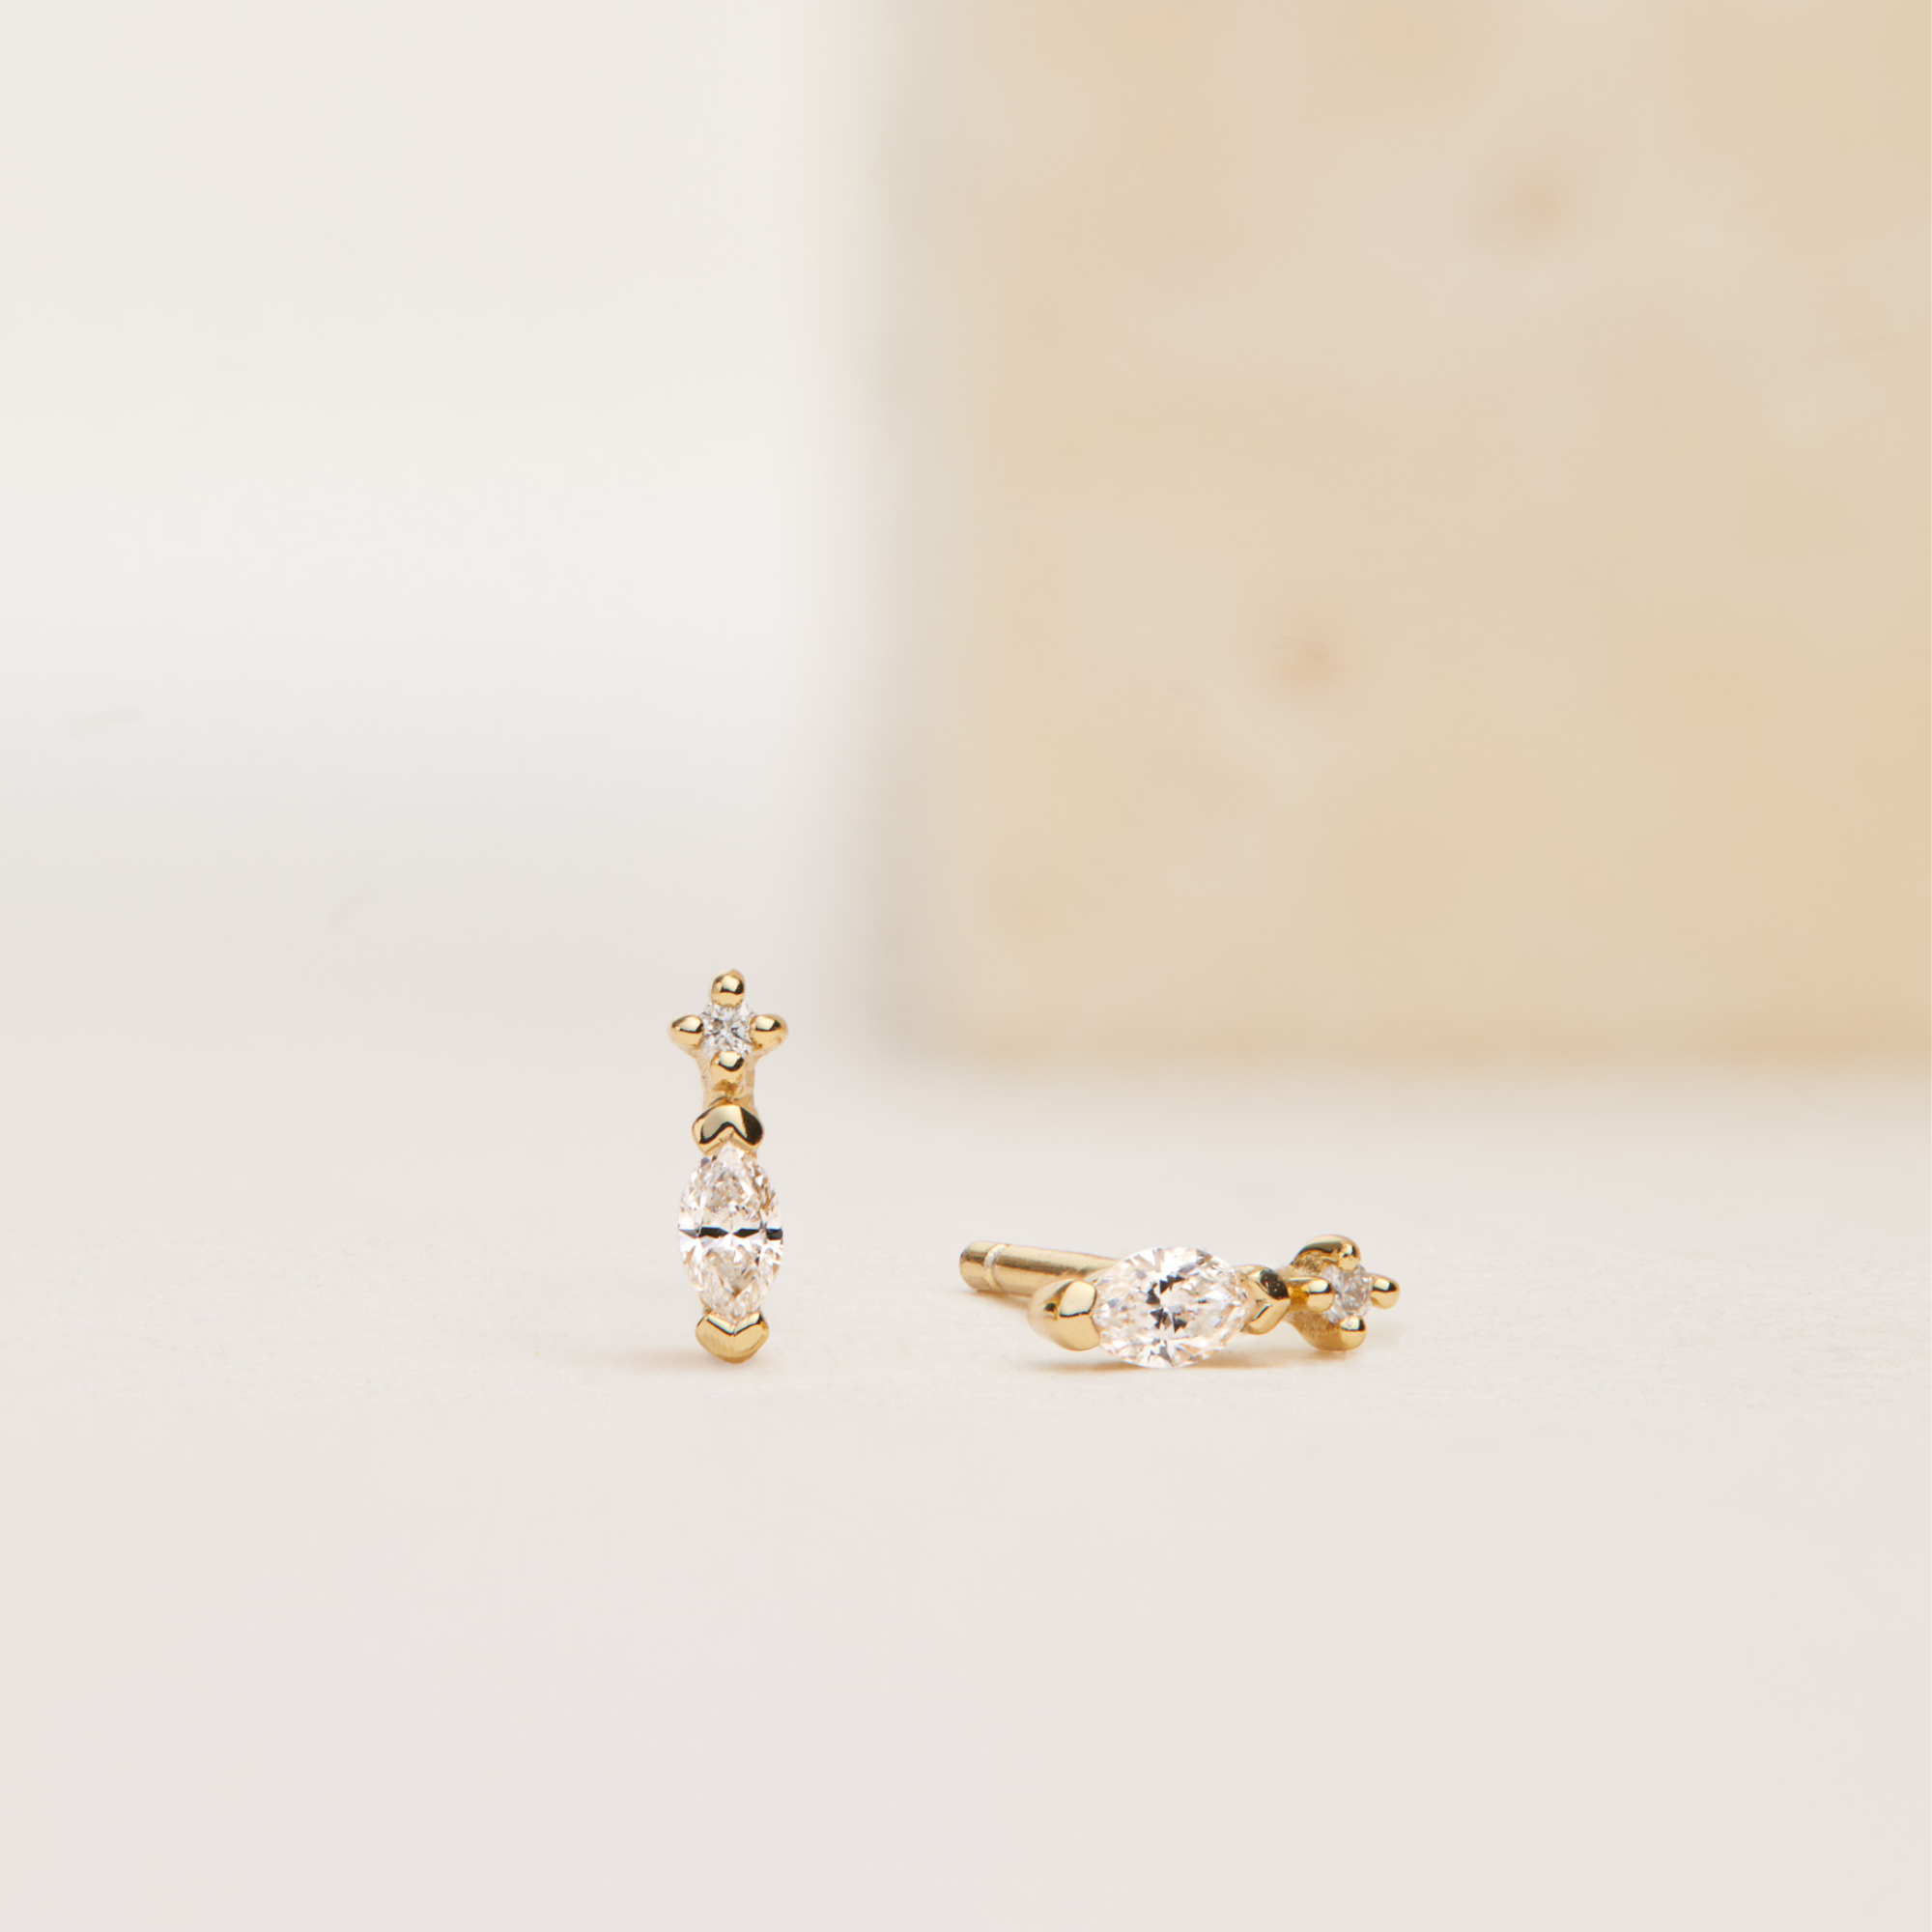 Gold marquise diamond stud earrings one laying down one standing up on a faded cream background